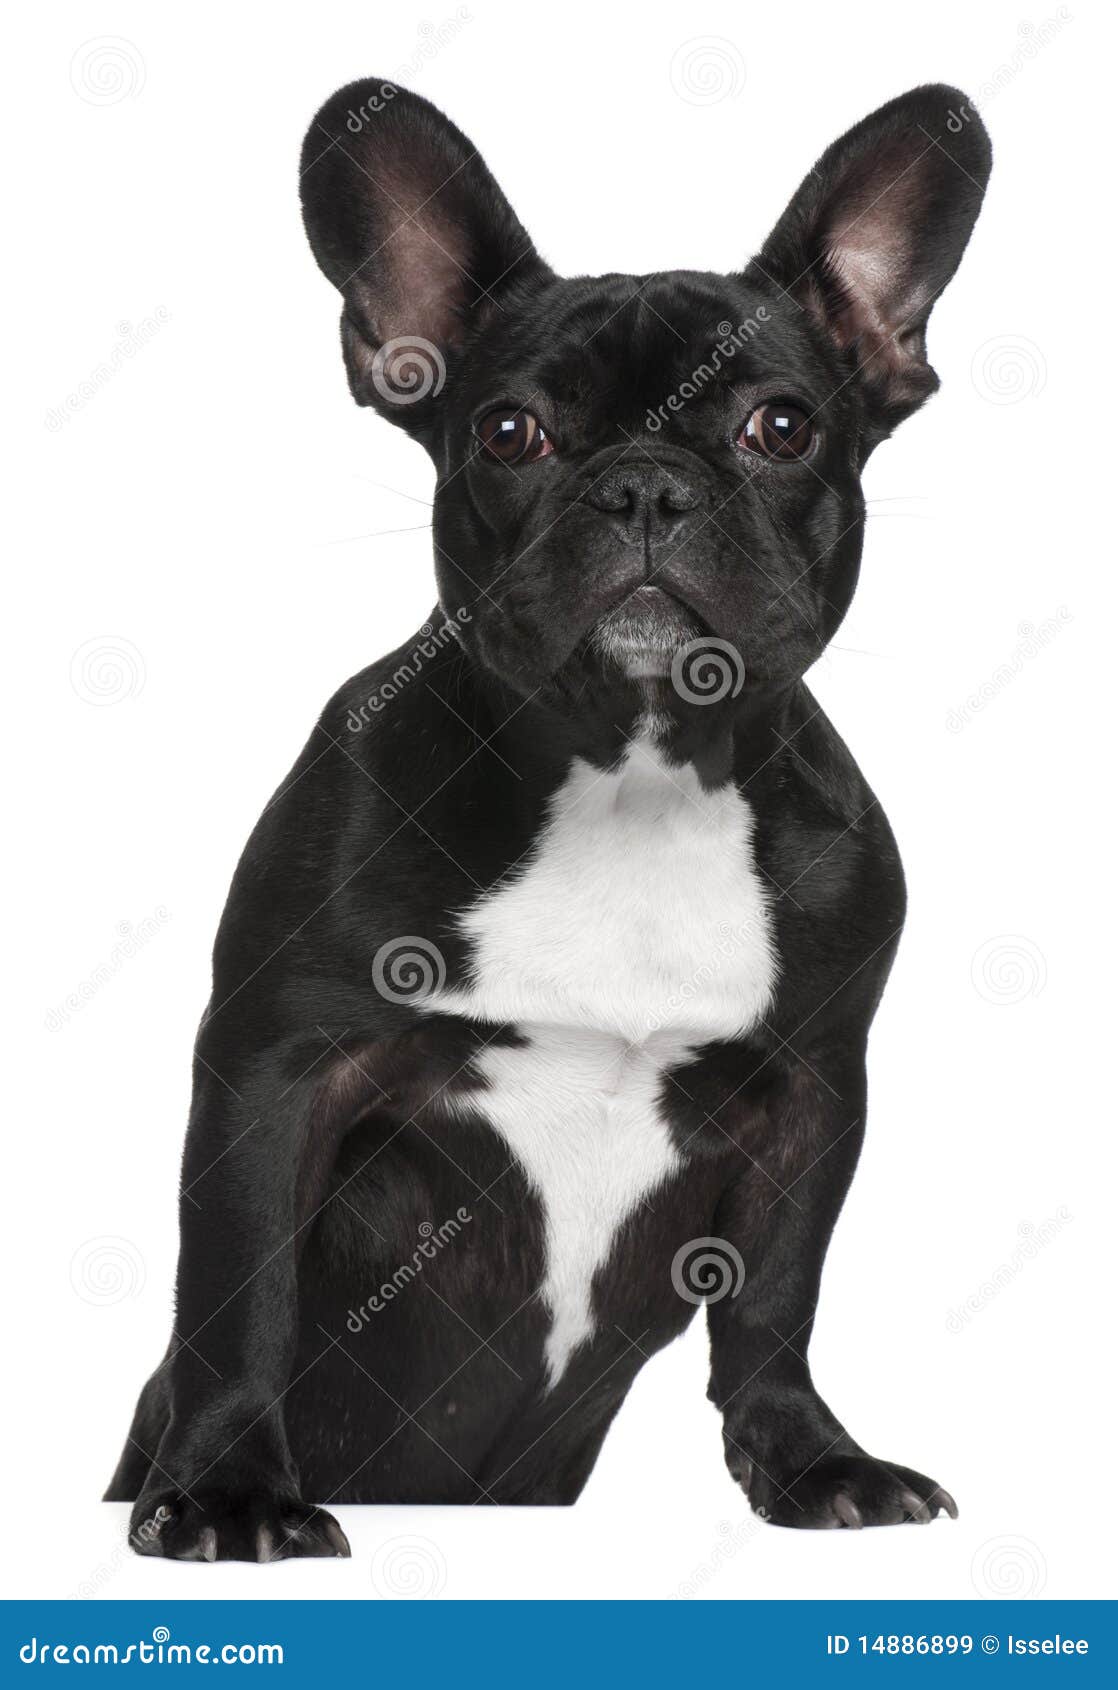 French Bulldog Puppy, 7 Months Old, Standing Stock Image - Image of ...